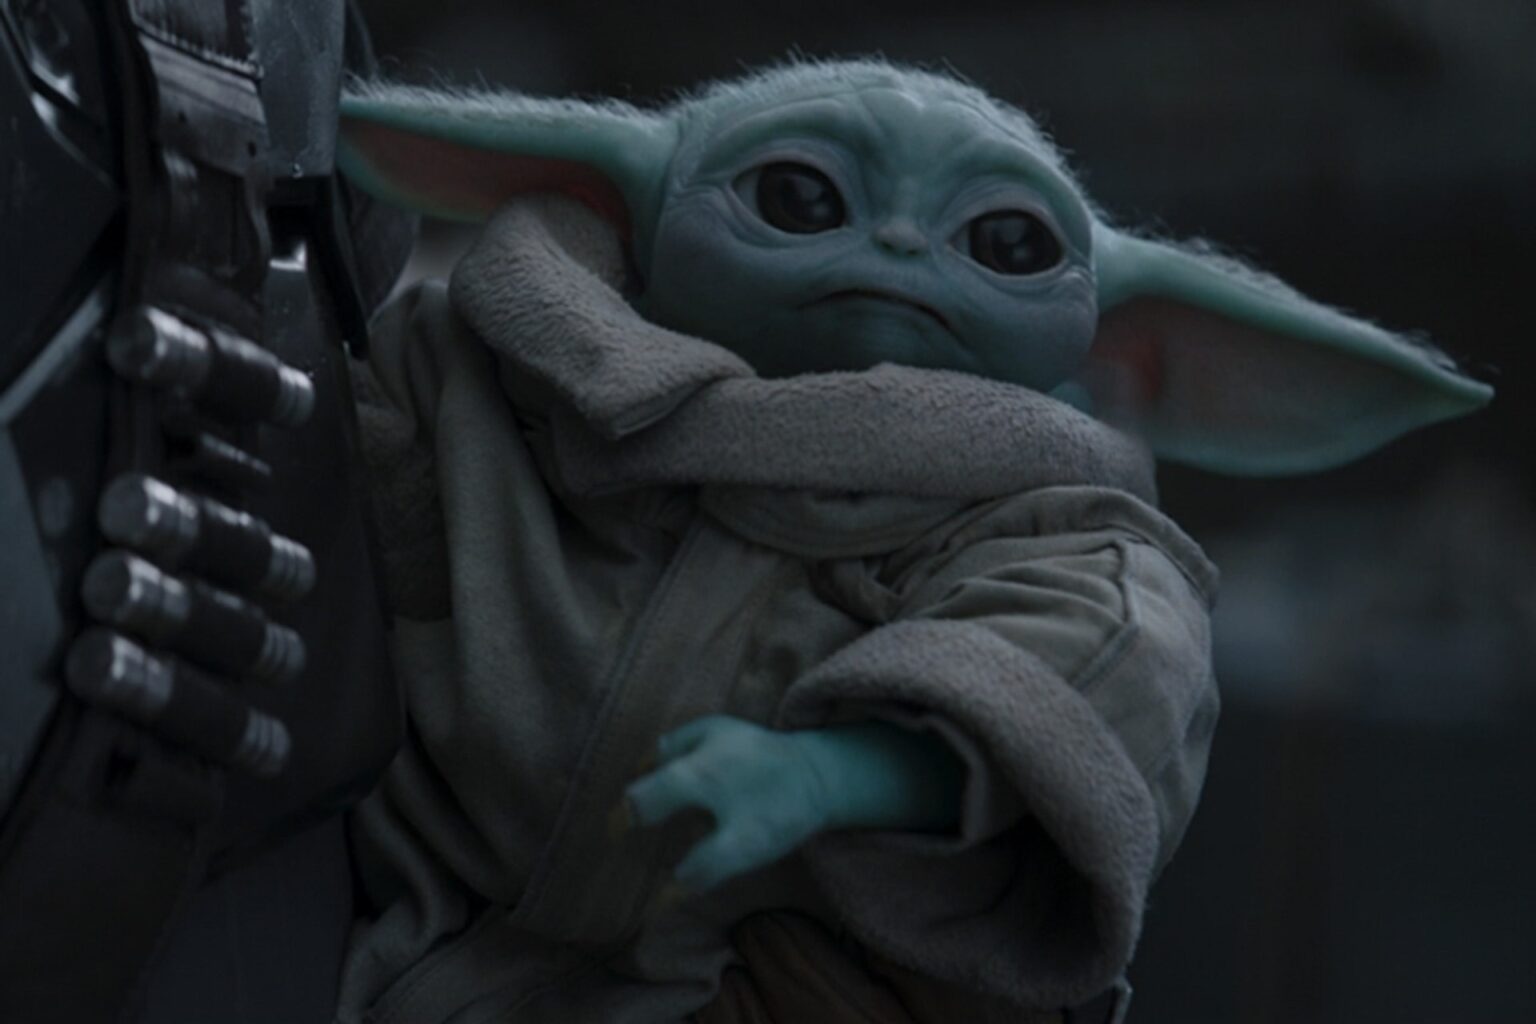 Let’s talk about everyone’s favorite homeslice, Baby Yoda. If you need a Baby Yoda gif then look no further! Here are some of the best.